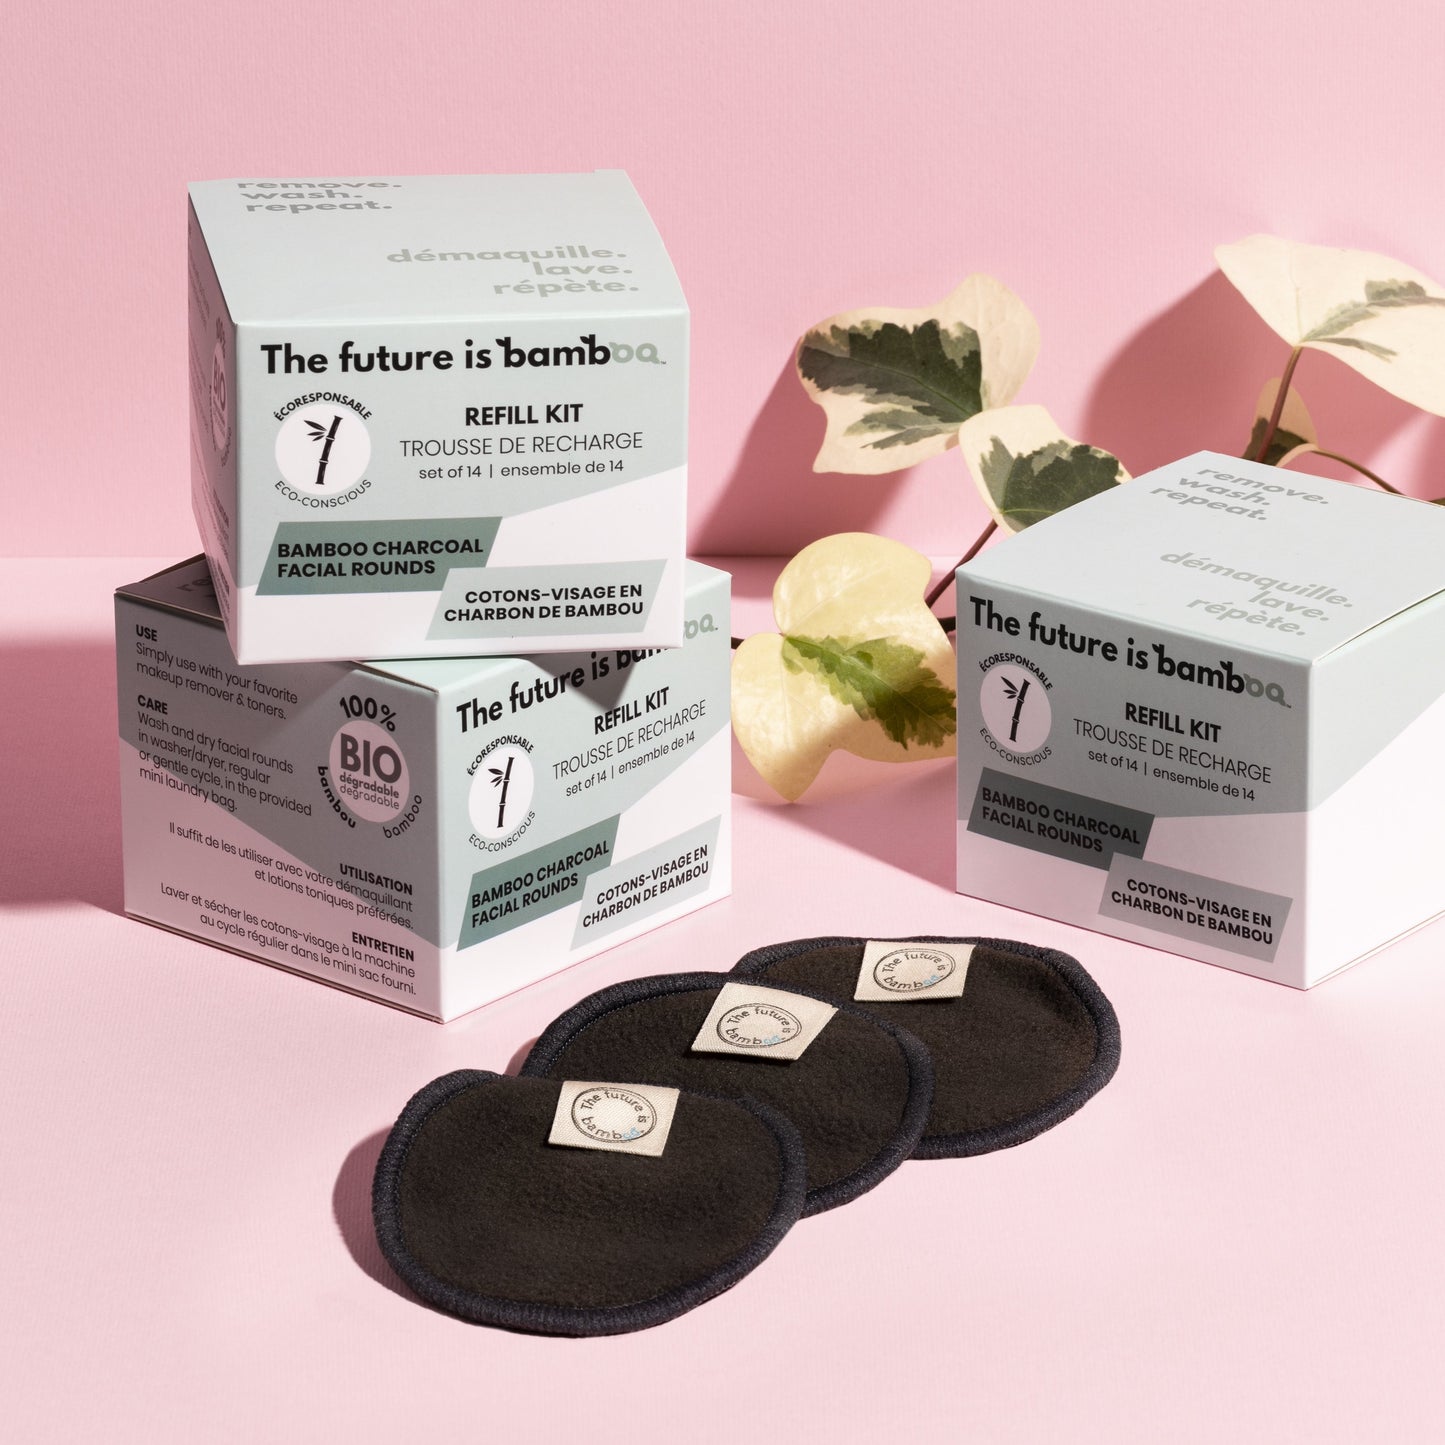 Bamboo Charcoal Facial Rounds REFILL KIT - The Future is Bamboo 